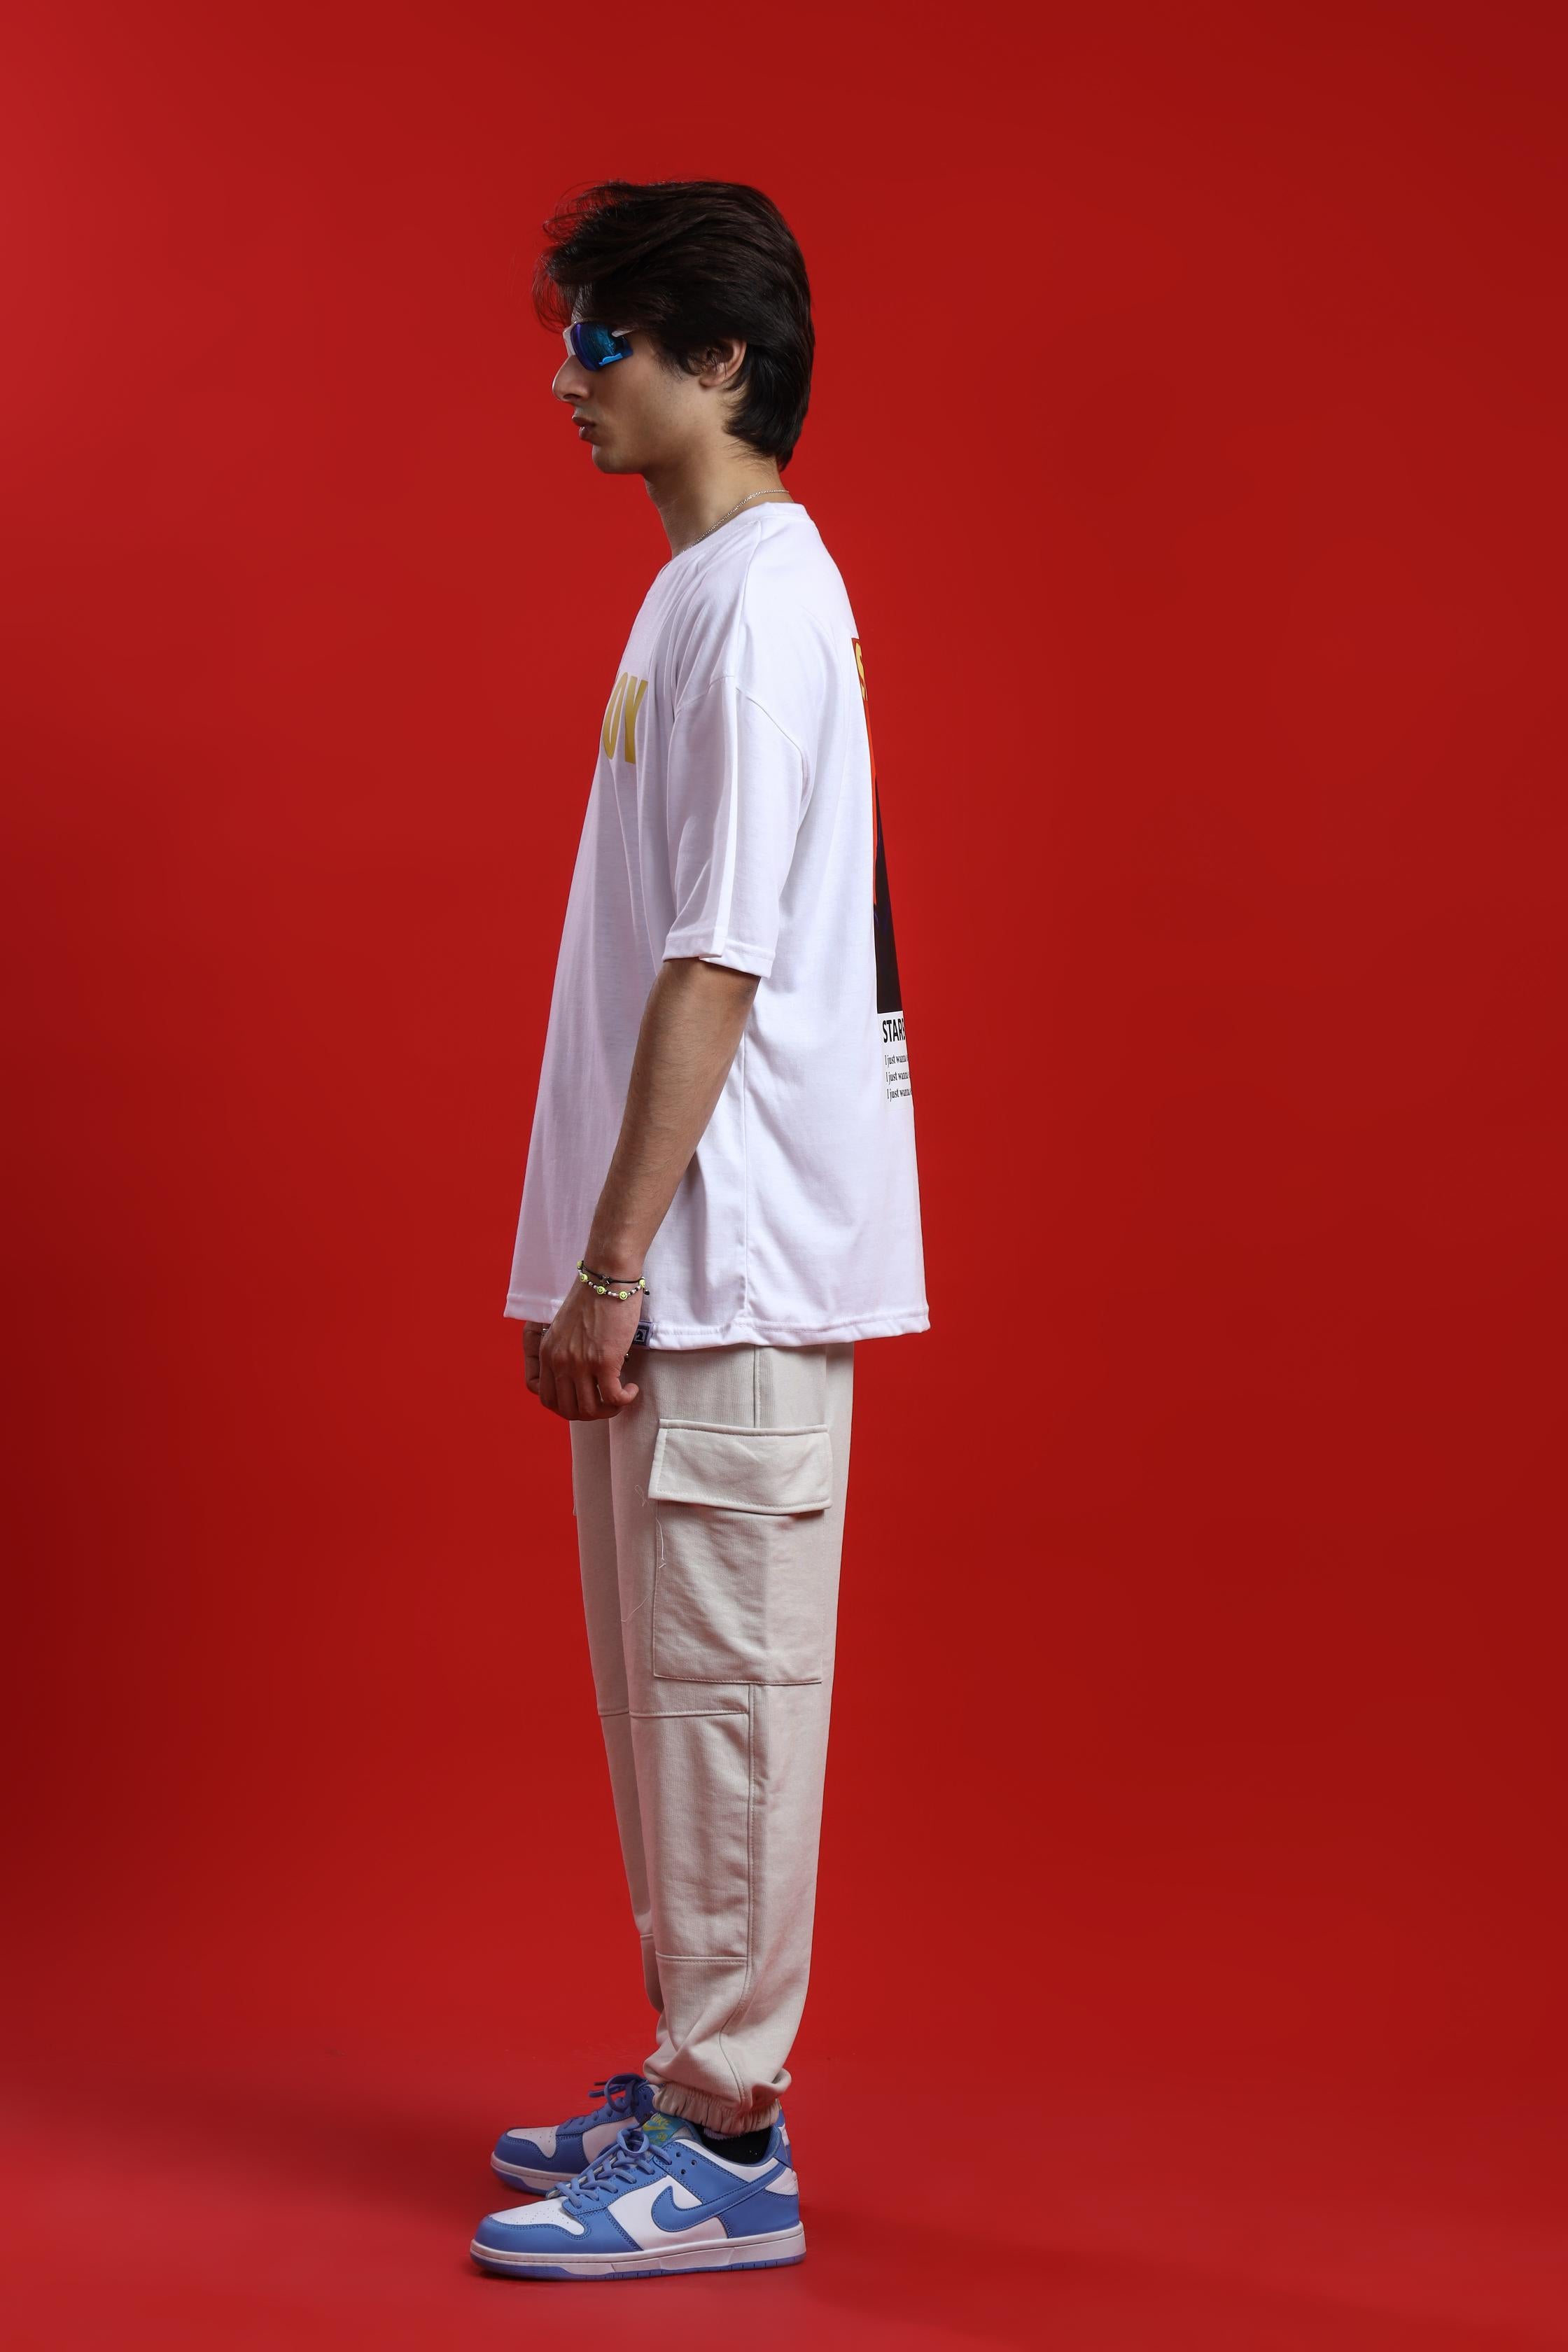 STAR BOY: I JUST WANNA OVERSIZED T-SHIRT - Shop Now - Checkmate Atelier